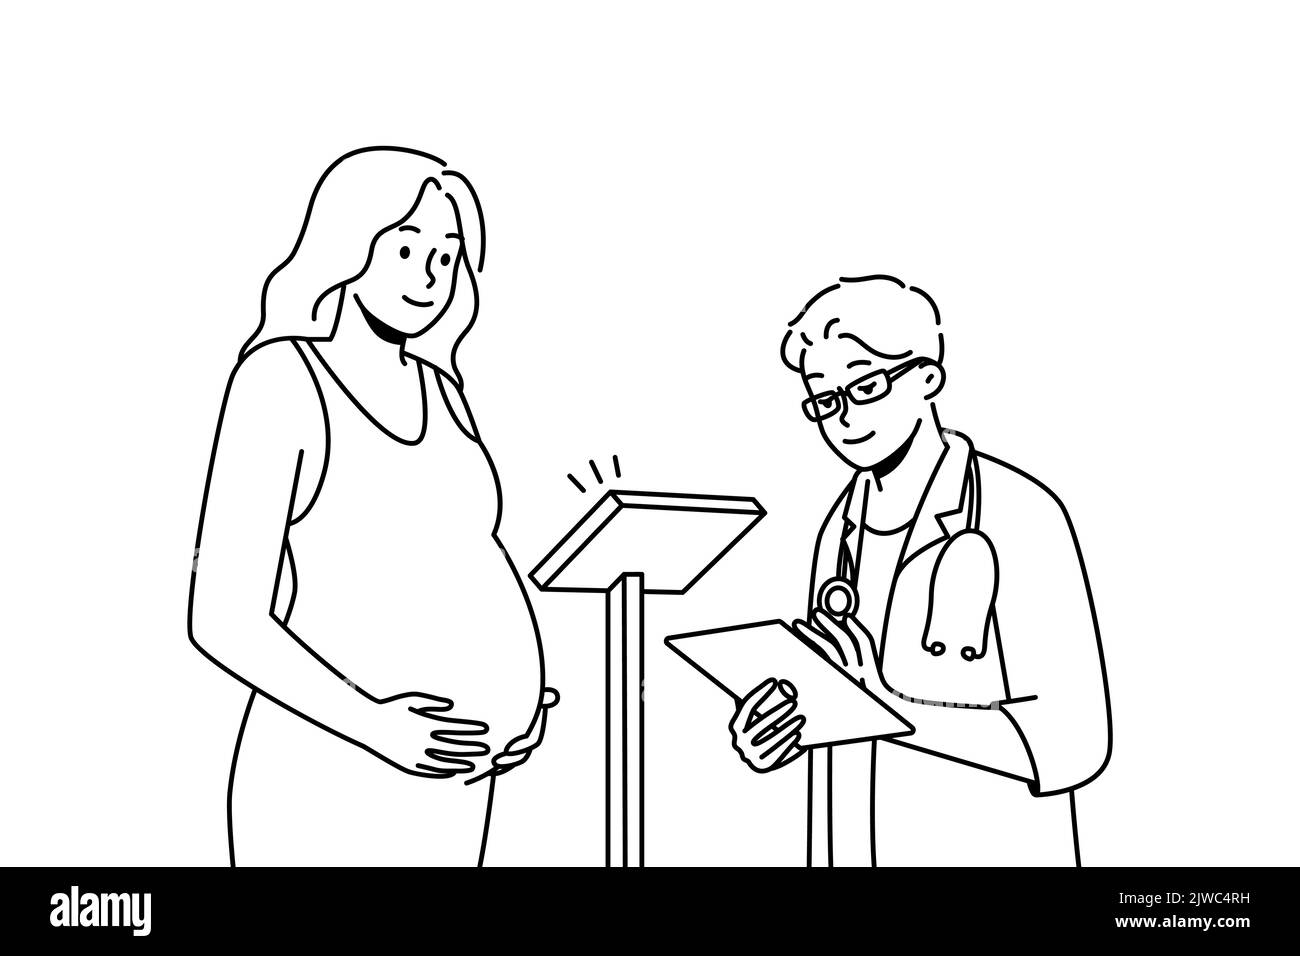 Pregnant woman hospital Black and White Stock Photos & Images - Alamy